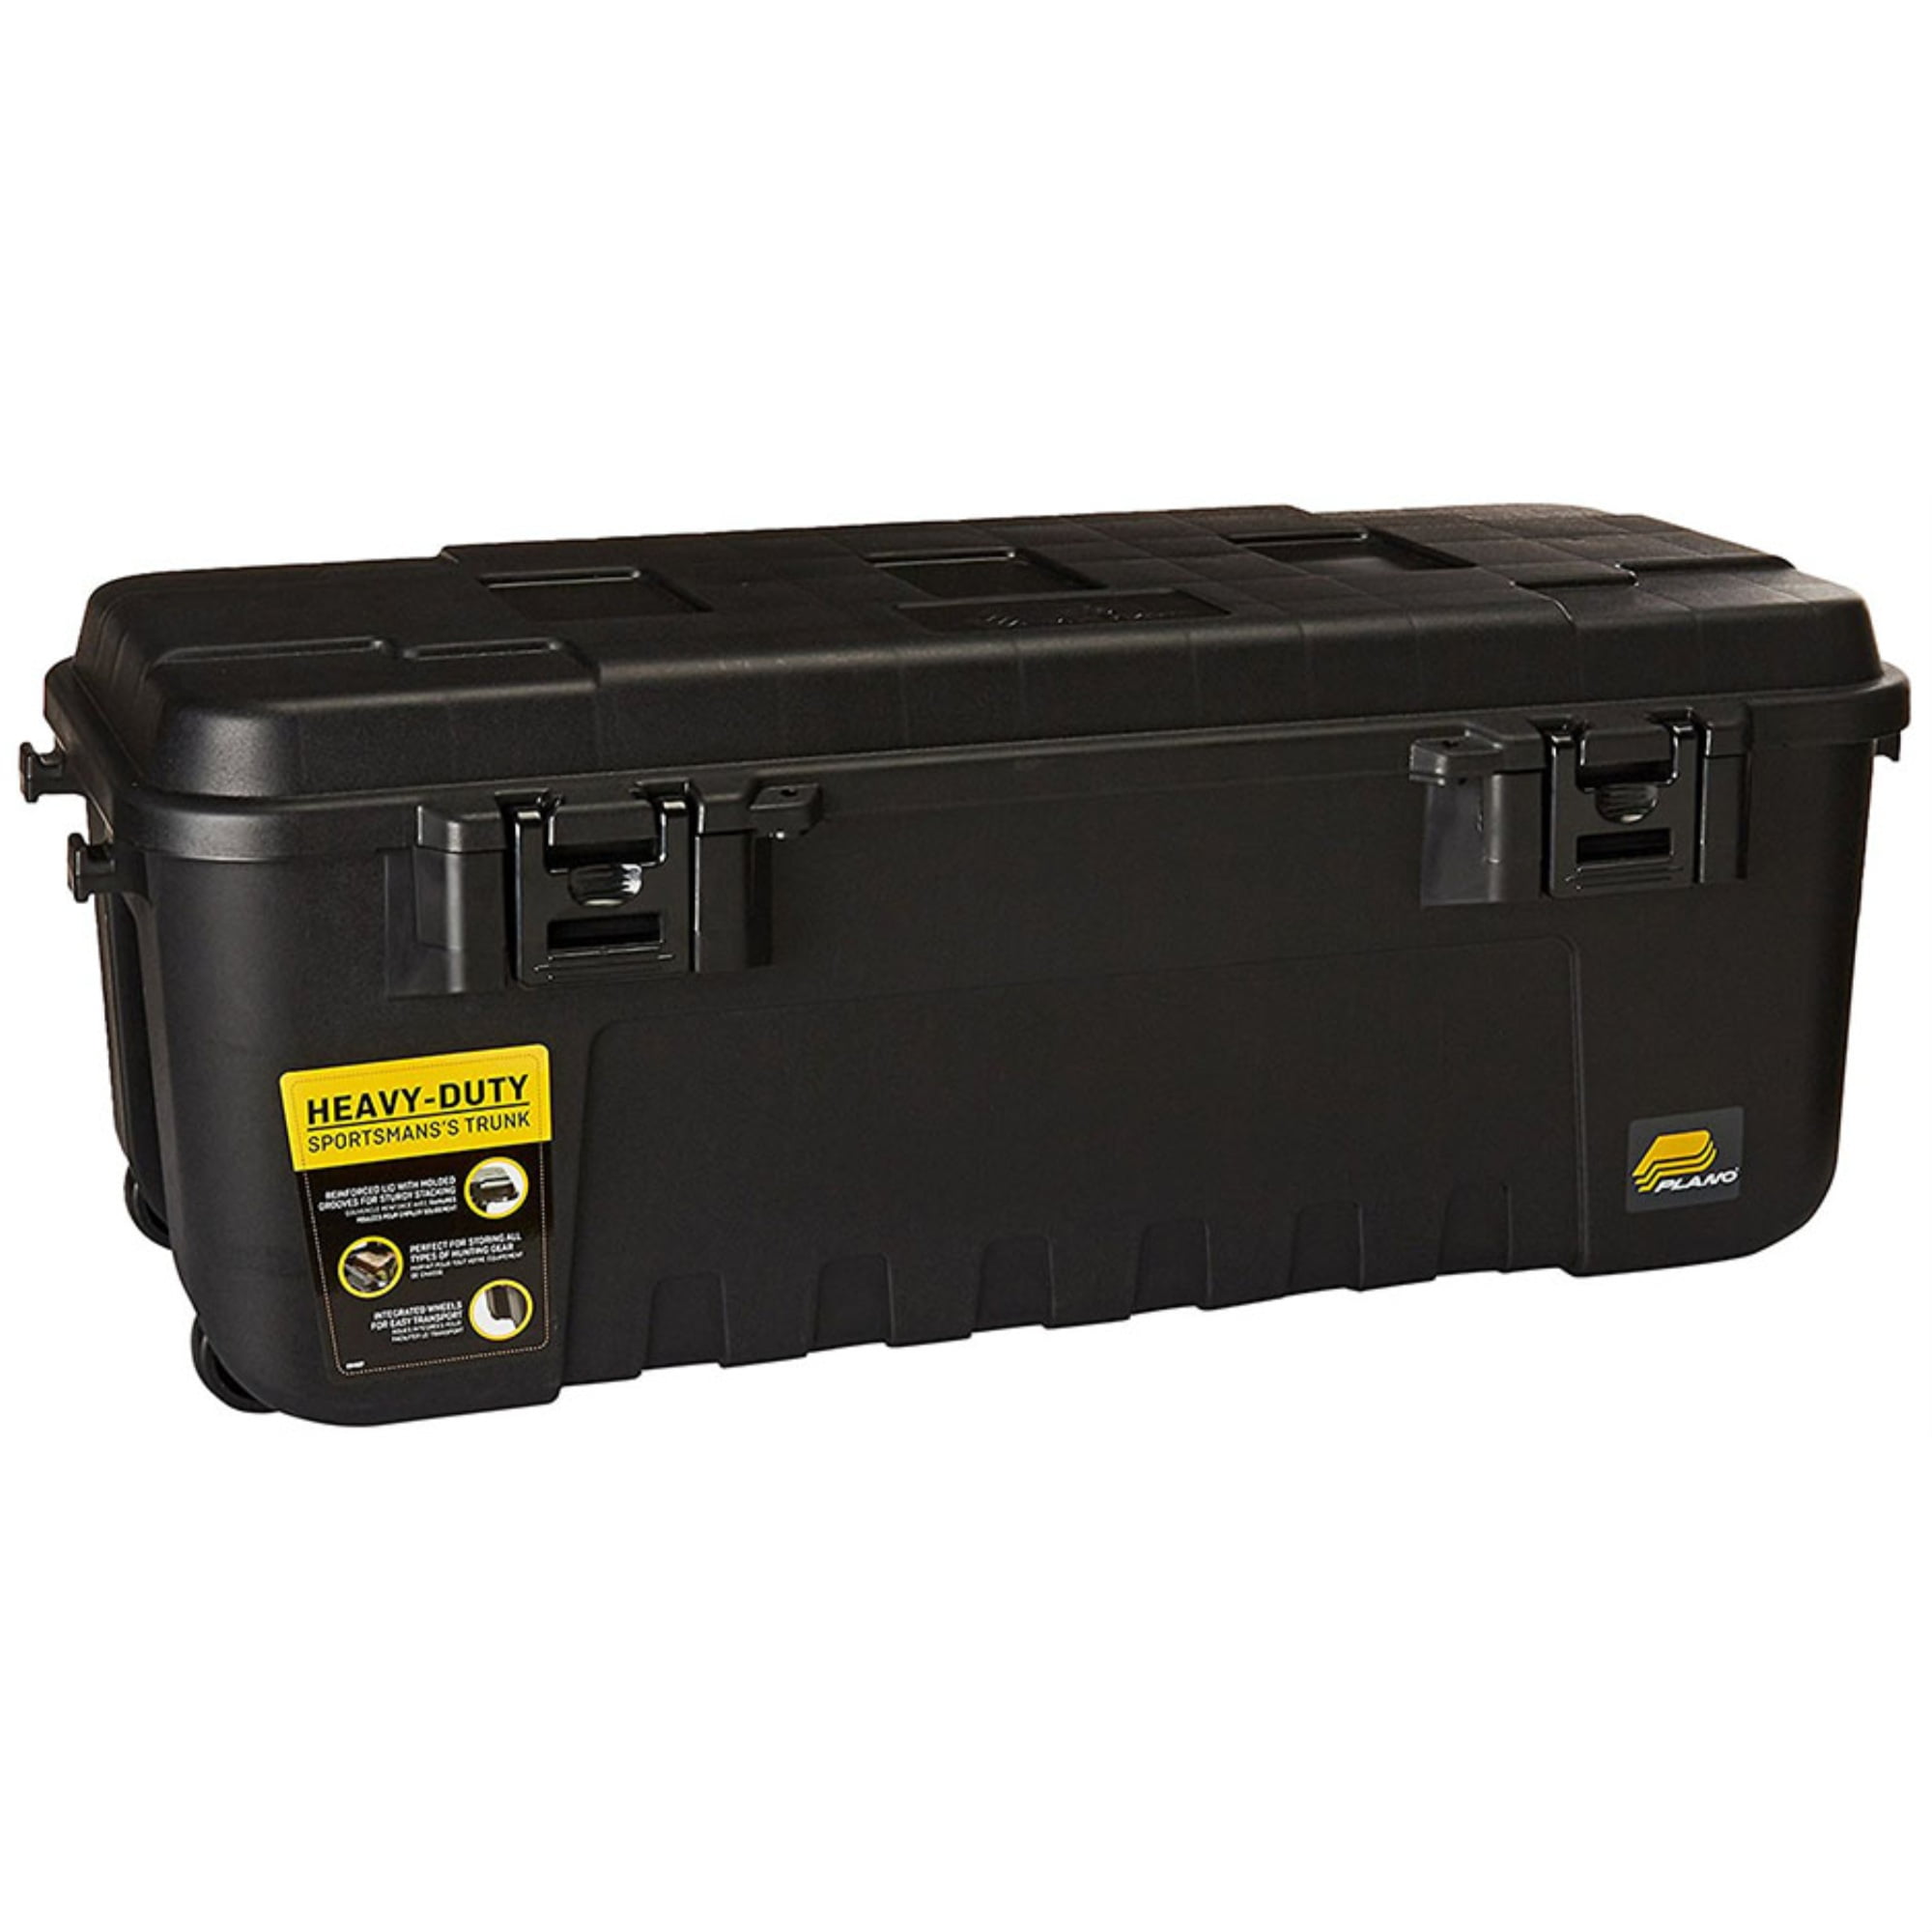 Plano Indoor/Outdoor Exterior Utility Automotive Stackable Storage Trunk  with Wheels and Latches, 108 Quart, Black, PLA1819A - Walmart.com